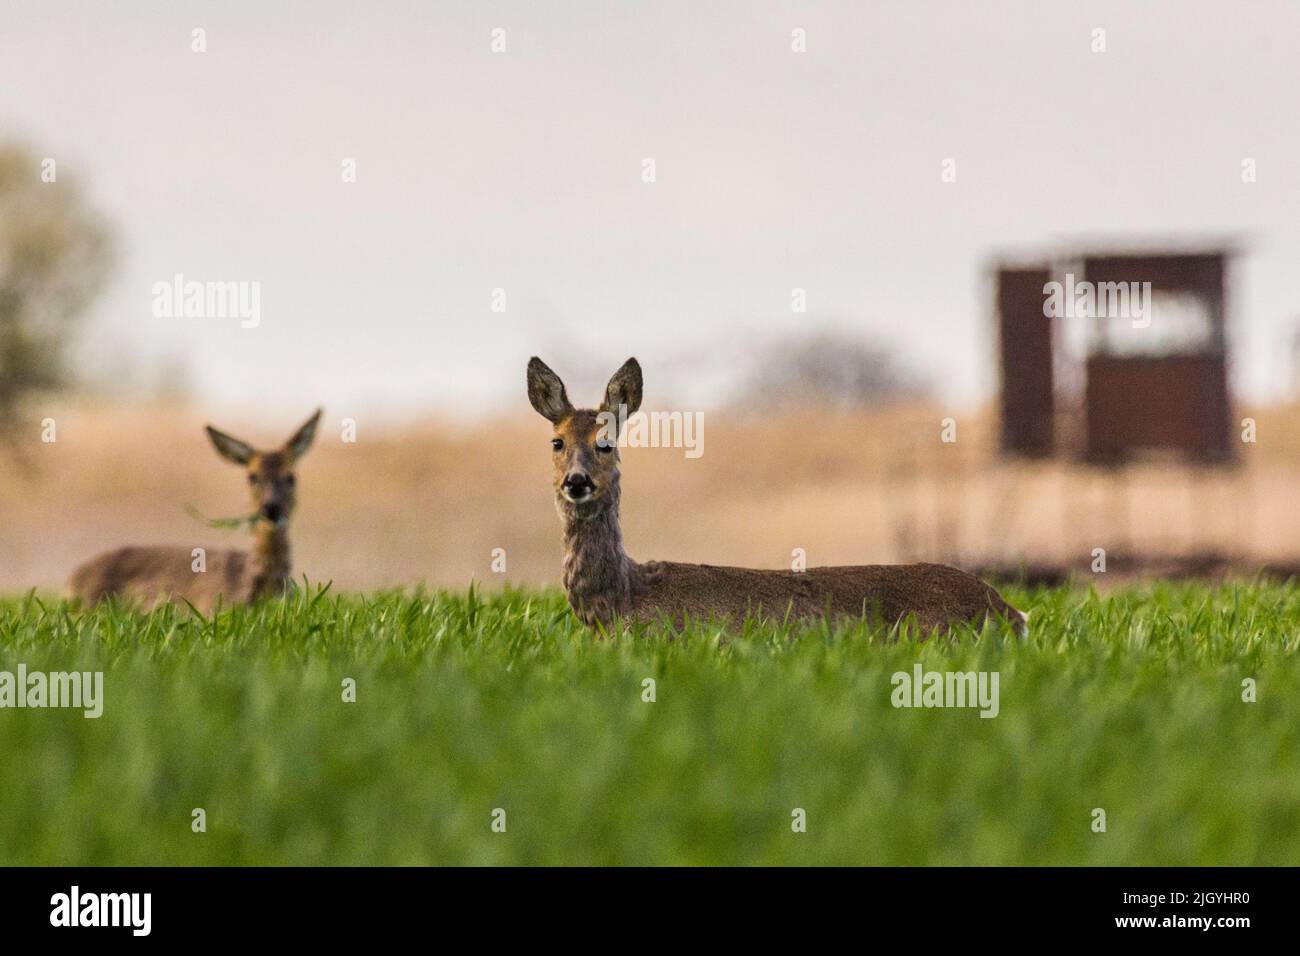 Two deer in a sunlit field, looking at the camera Stock Photo